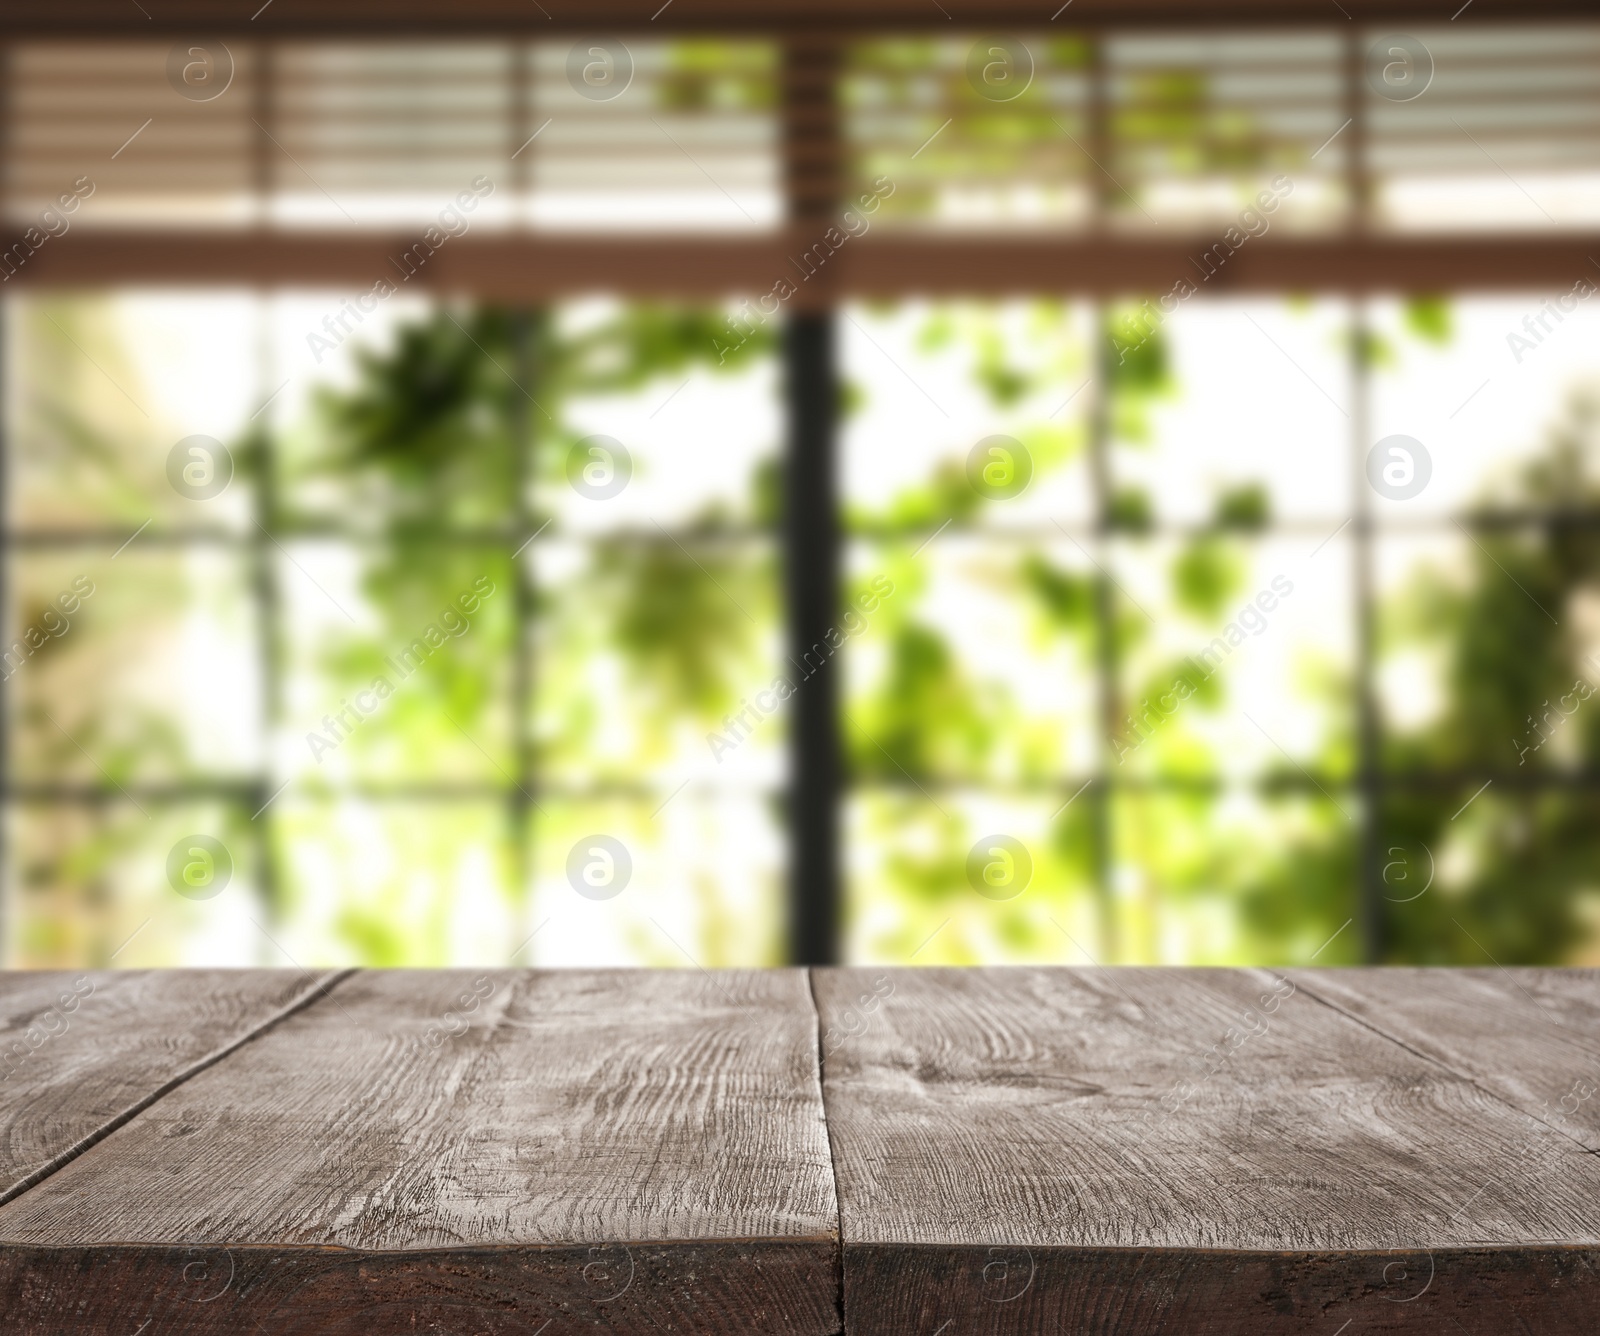 Image of Empty wooden table in front of window. Sunny morning 